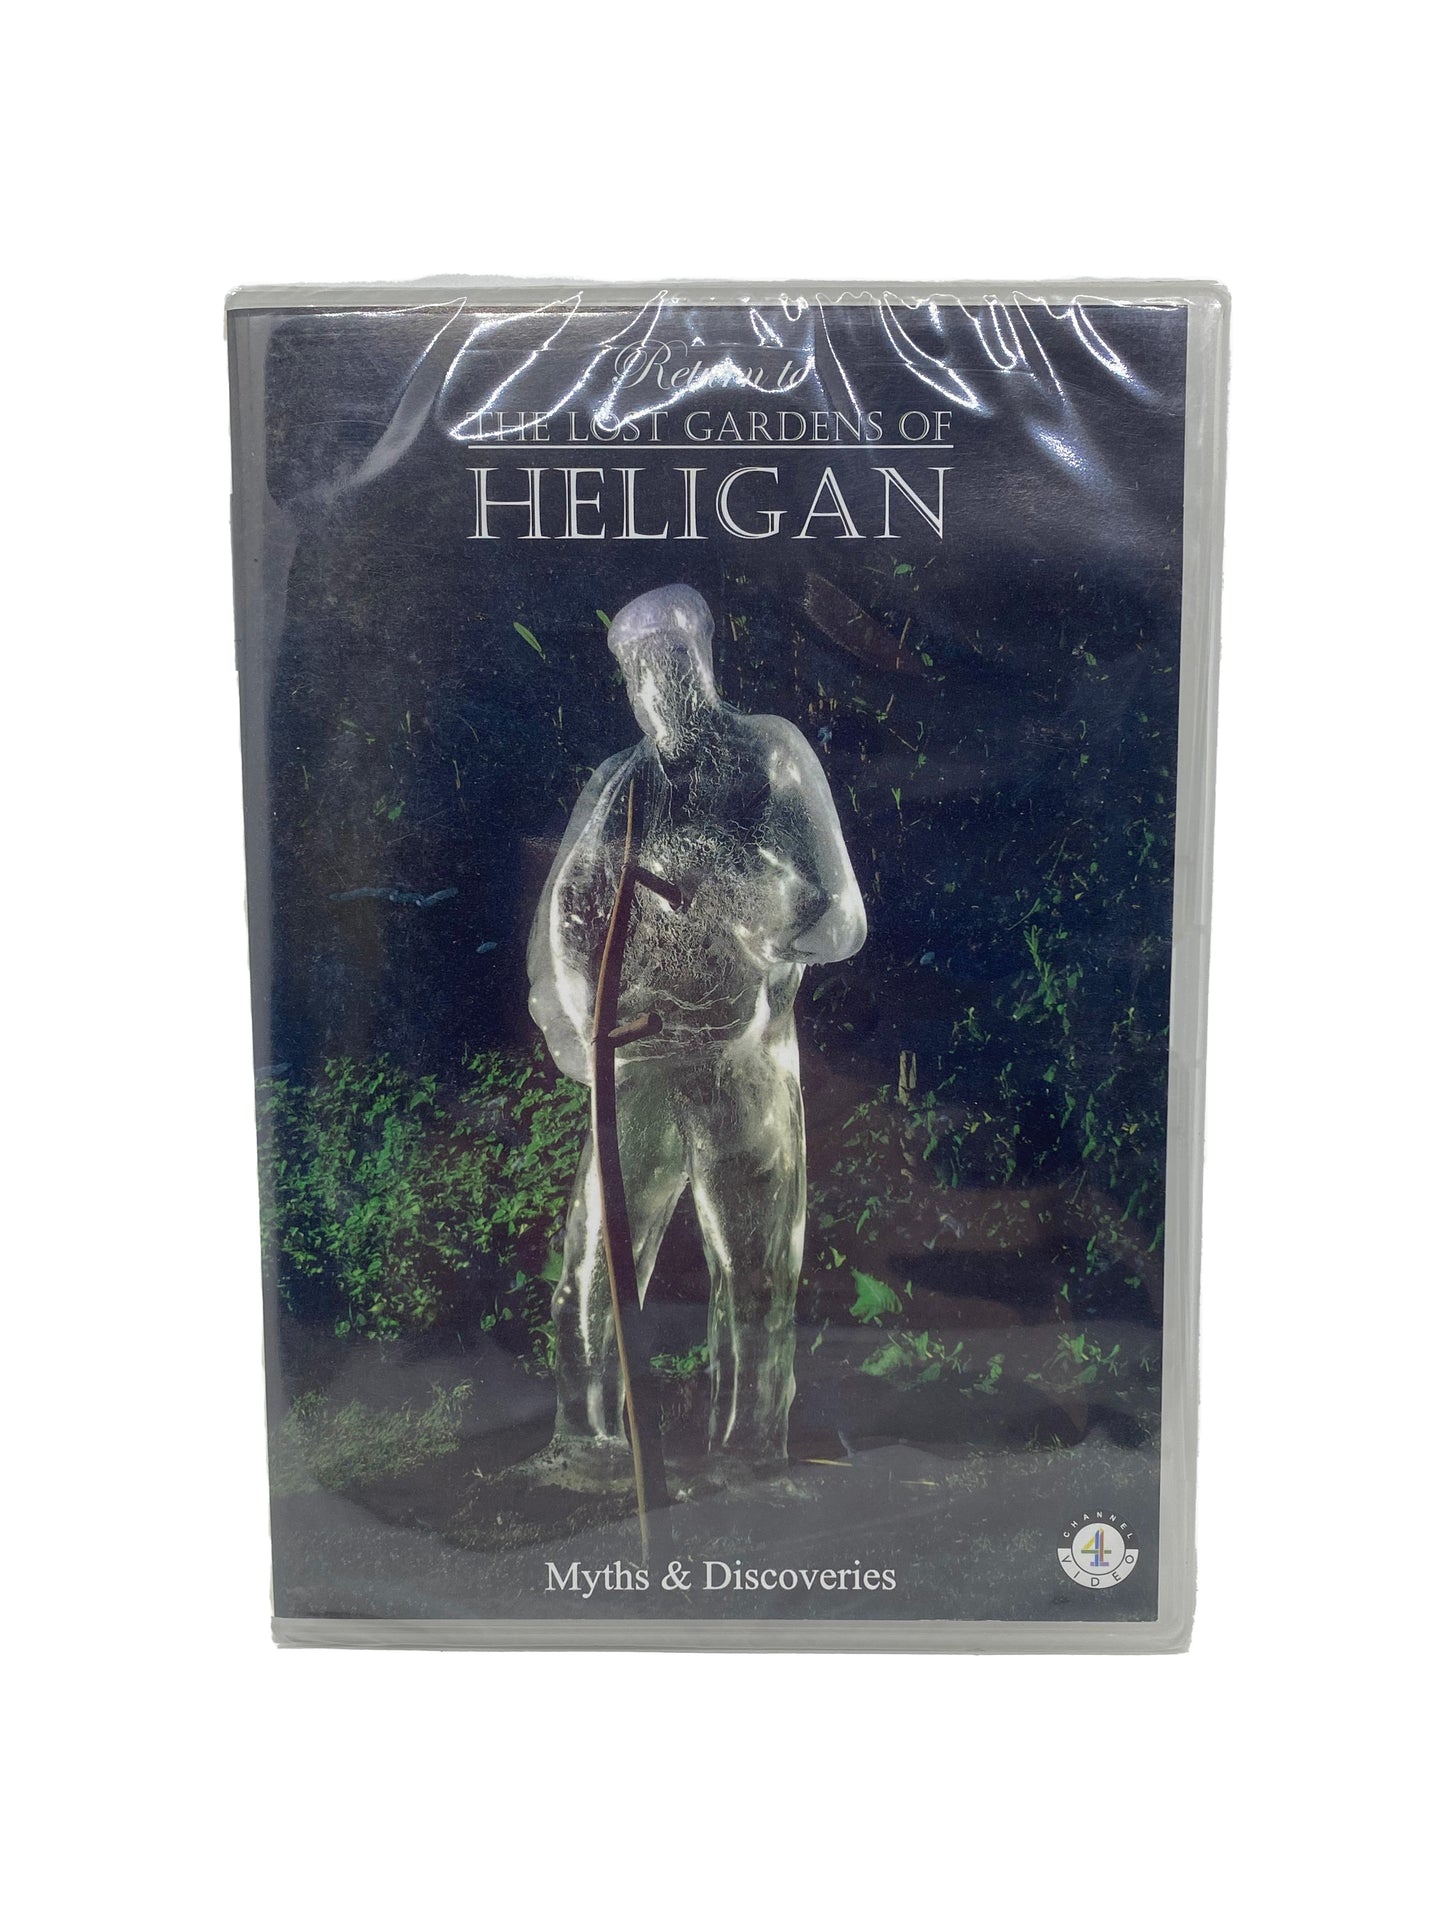 Return to The Lost Gardens of Heligan DVD